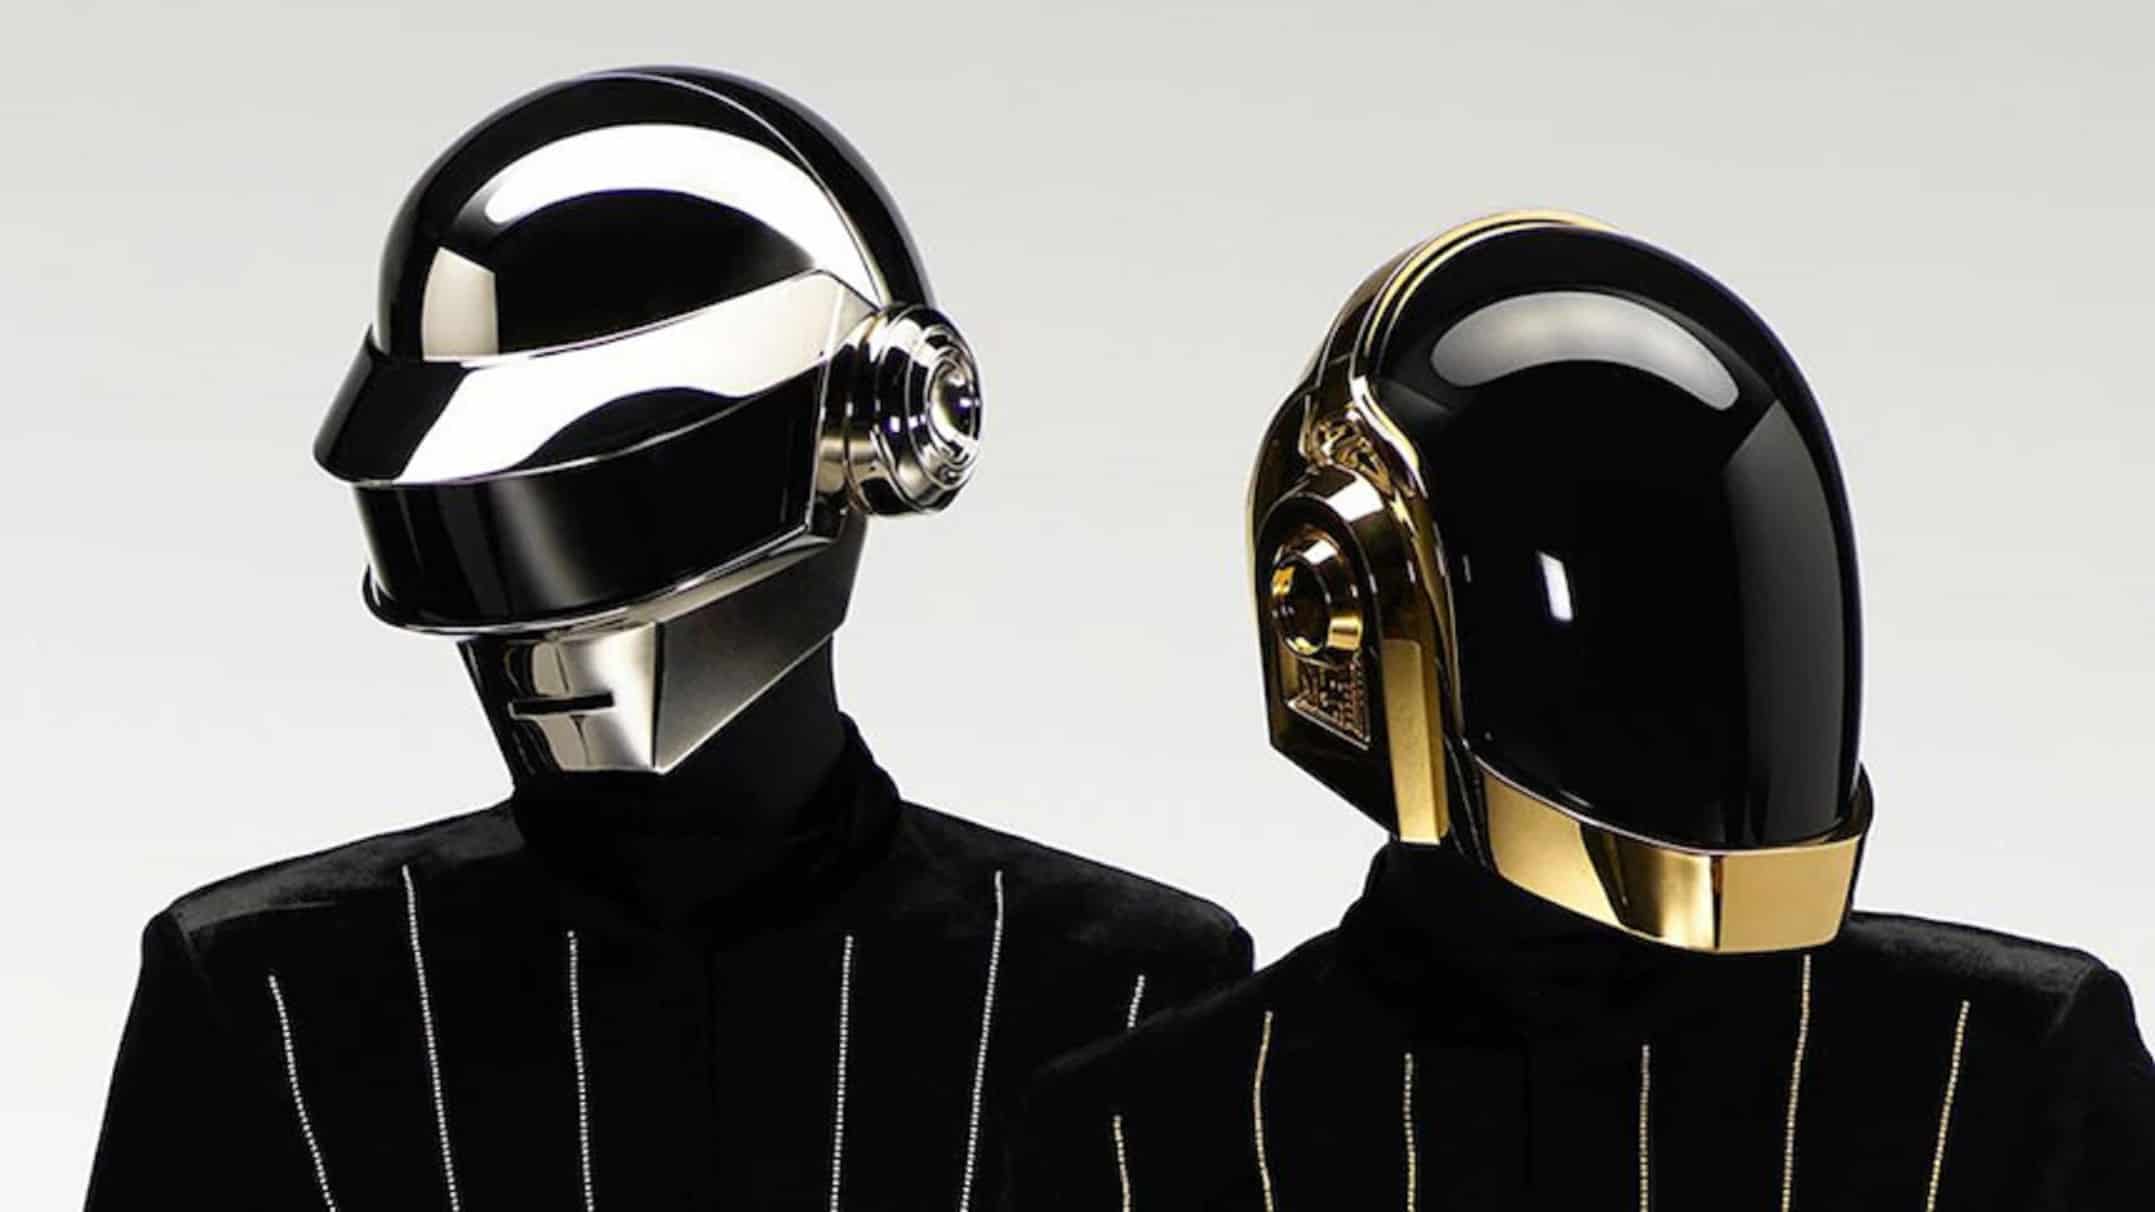 Daft Punk release new exclusive merchandise with Spotify